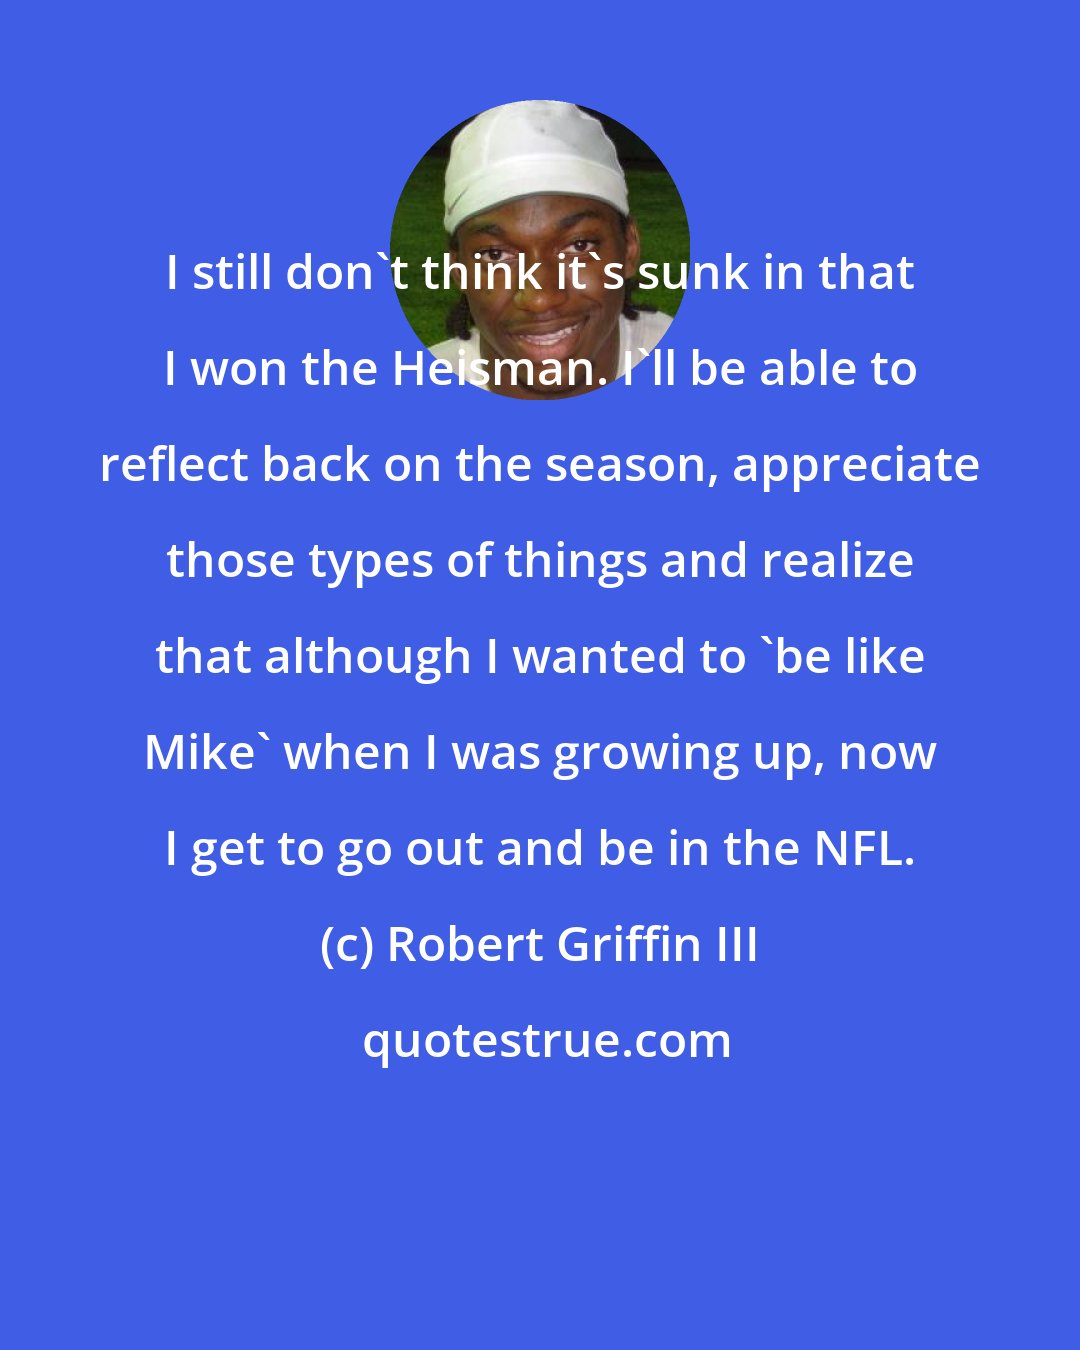 Robert Griffin III: I still don't think it's sunk in that I won the Heisman. I'll be able to reflect back on the season, appreciate those types of things and realize that although I wanted to 'be like Mike' when I was growing up, now I get to go out and be in the NFL.